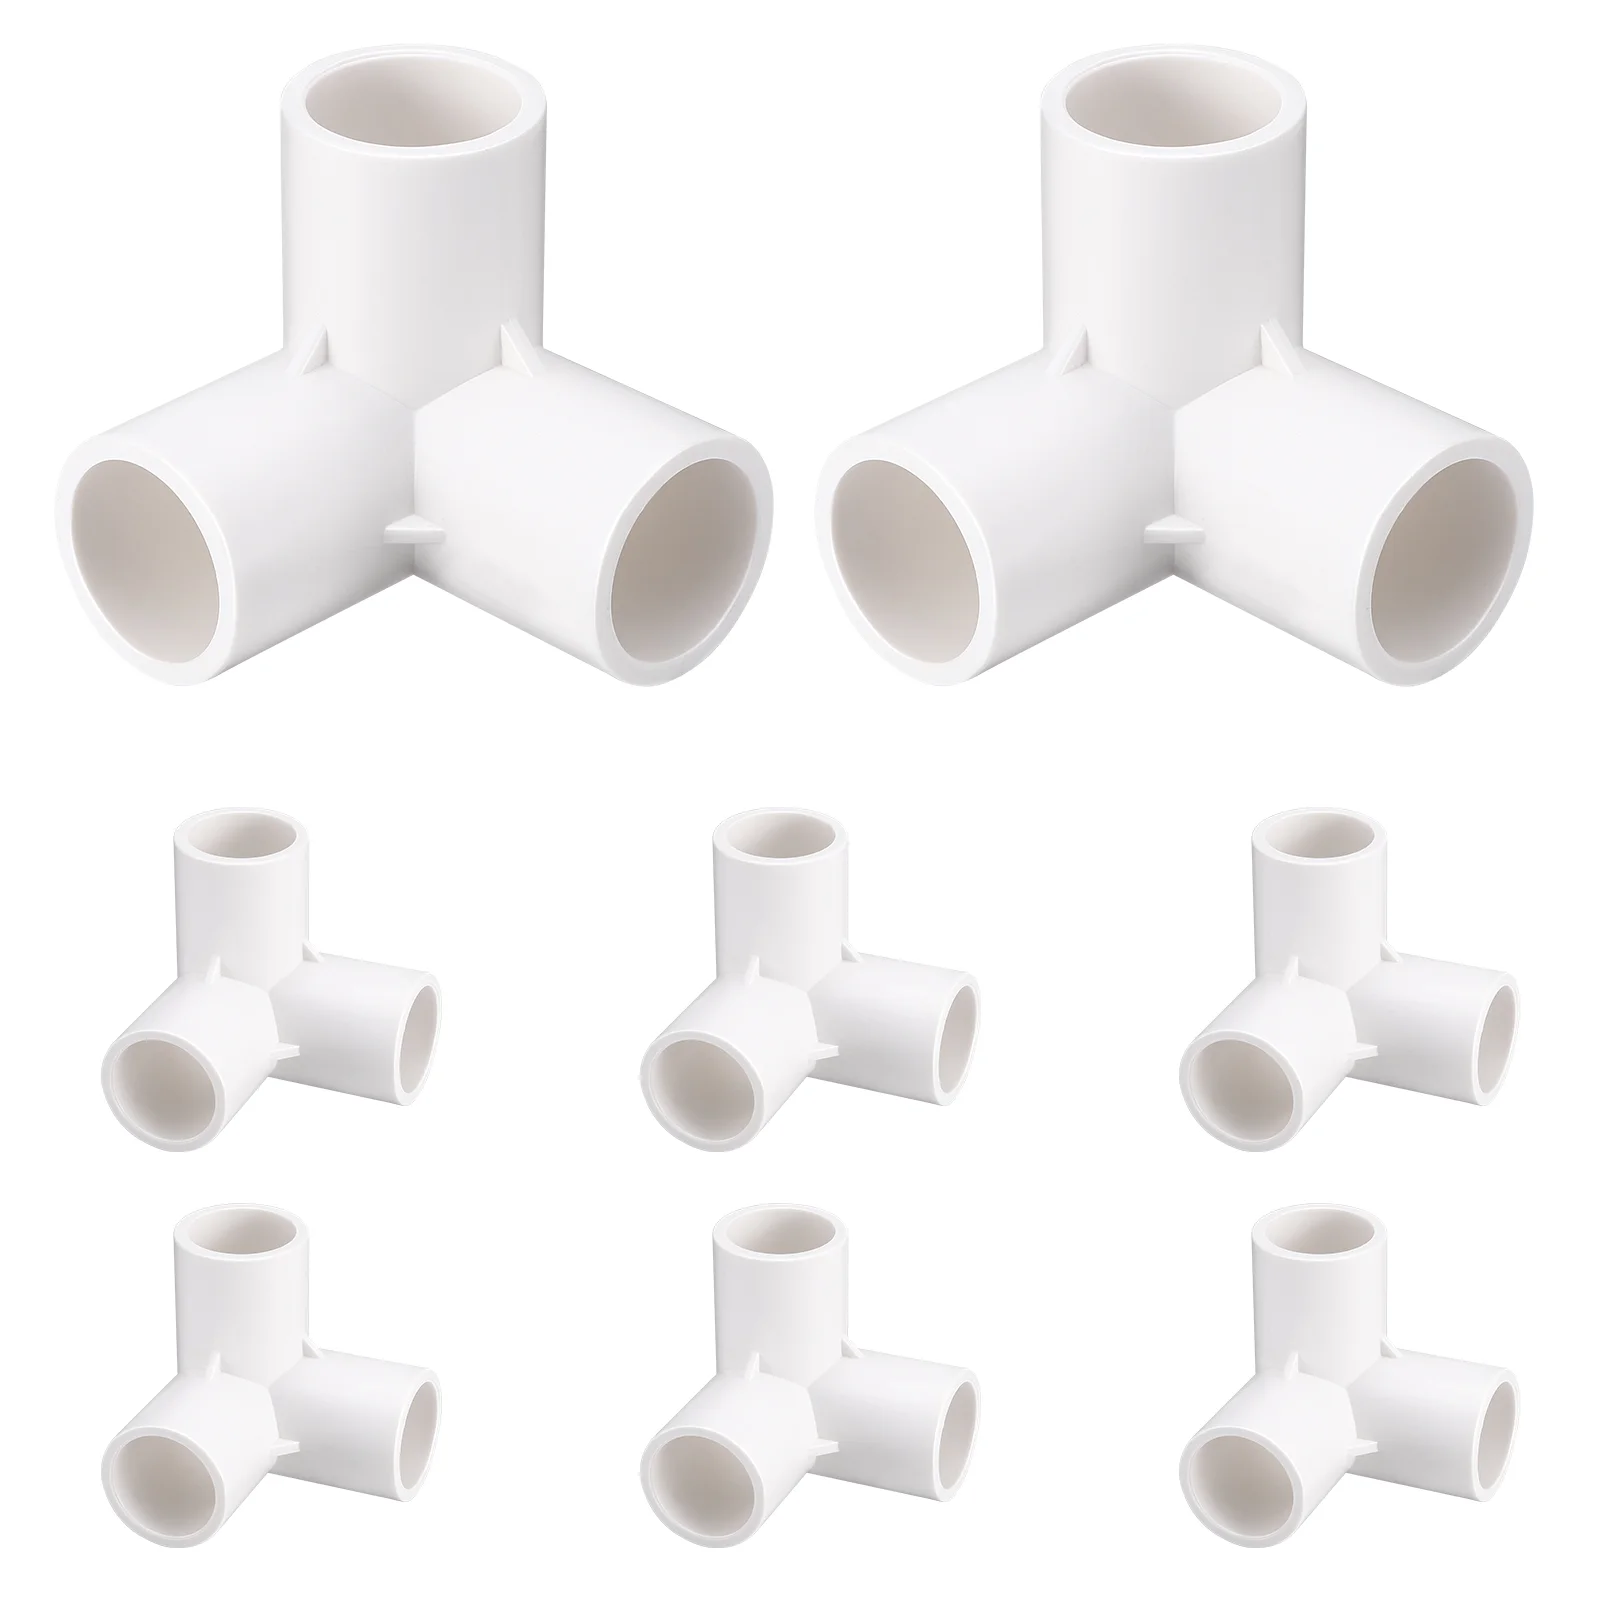 

Pvc Fitting Corner Elbow Fittings Compound Splitter Hose Shed Plastic White Conduit Plumbing 9 Jointing Cement Square Connector